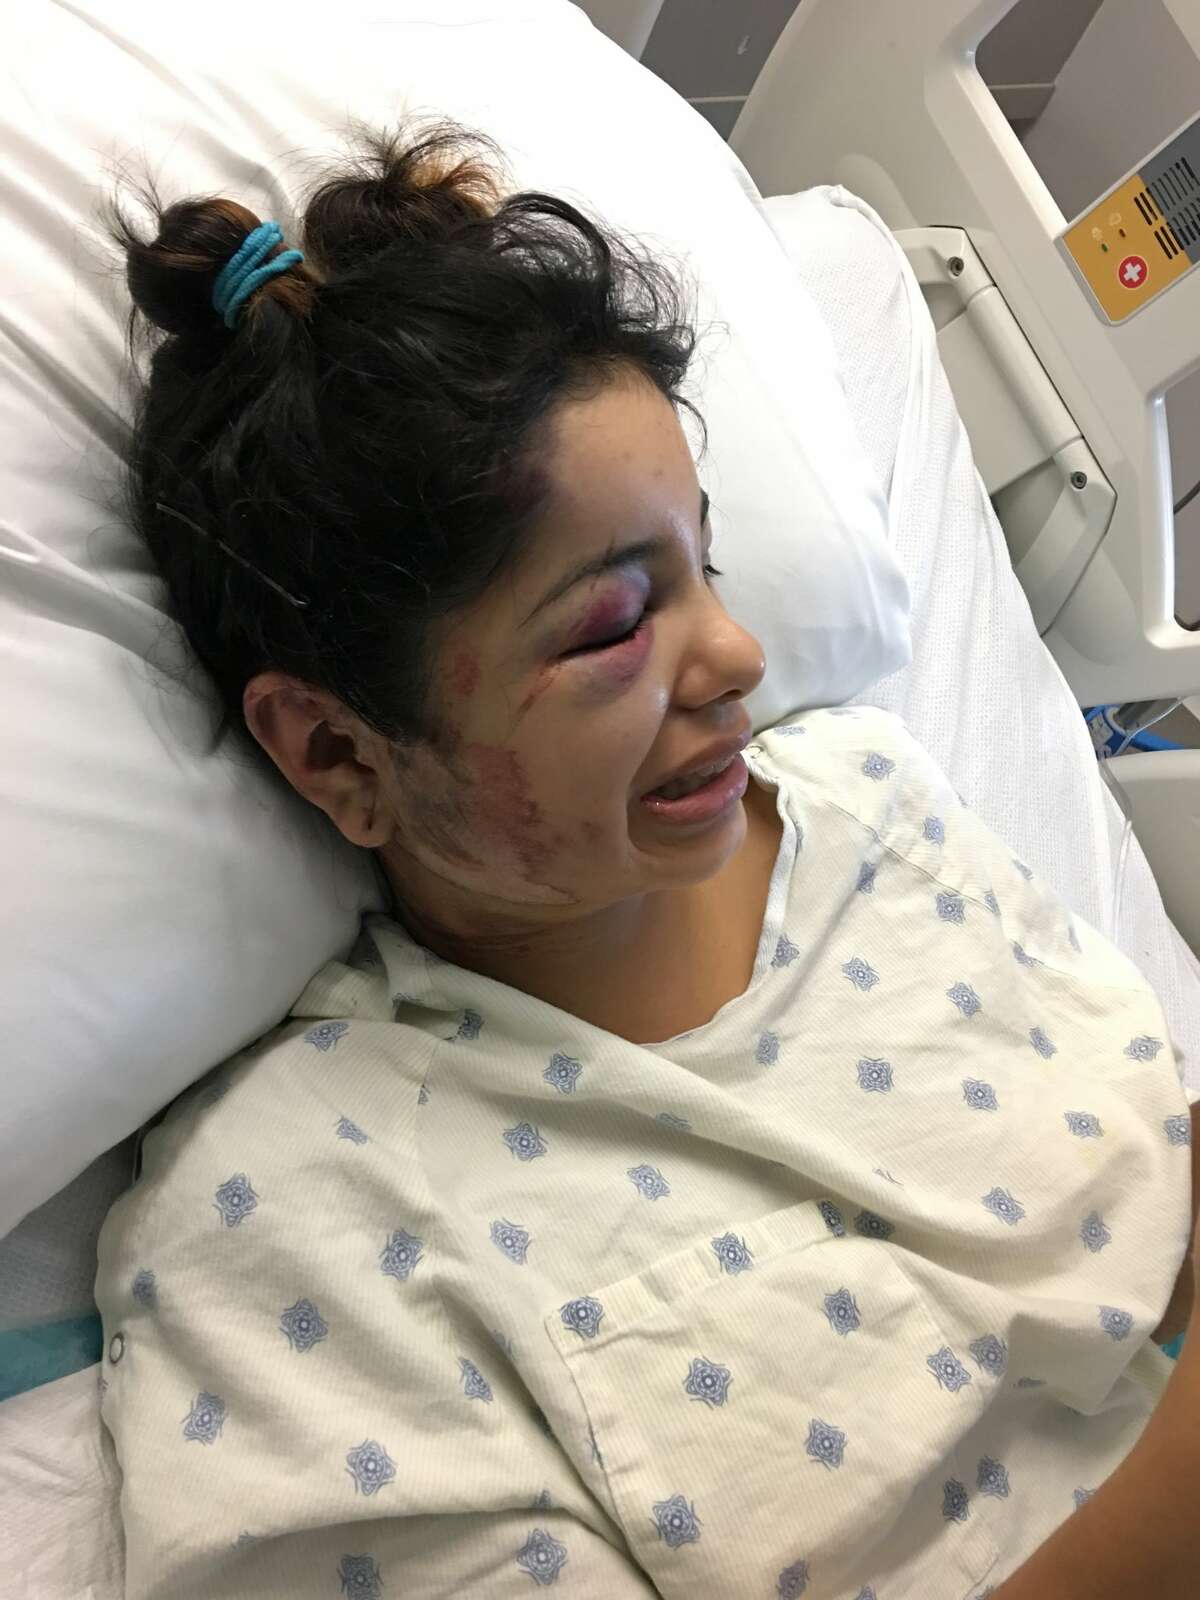 Ashley Martinez, the 21-year-old skateboarder who was run over by a car on Sept. 20, 2017, in the 5300 block of DeZavala Road, shared graphic photos of her injuries with mySA.com. Nathan Thomas Losoya, 19, has been arrested on suspicion of failing to render aid in the case.